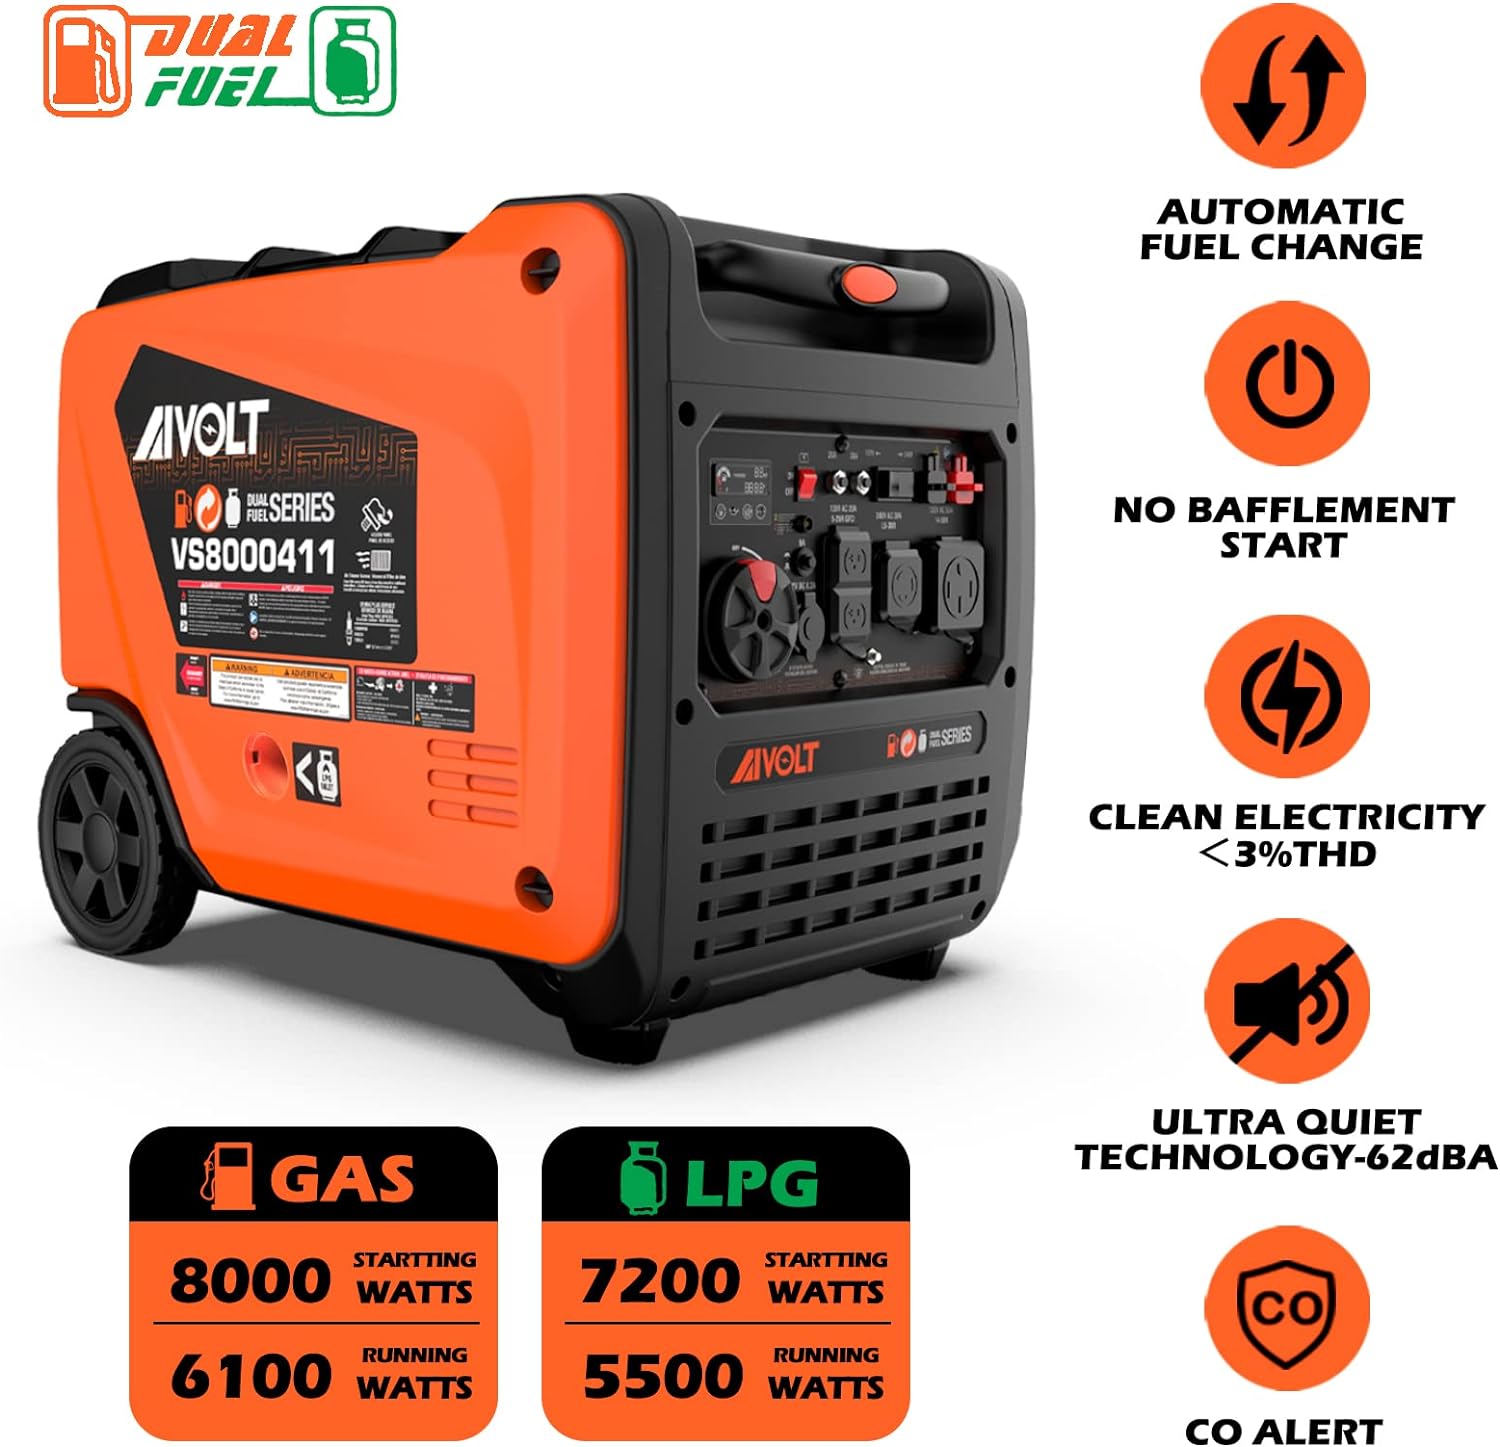 AIVOLT 8000 Watts Dual Fuel Portable Inverter Generator Super Quiet Gas Propane Powered Electric Start Outdoor Generator for Home Back Up Travel RV Camping